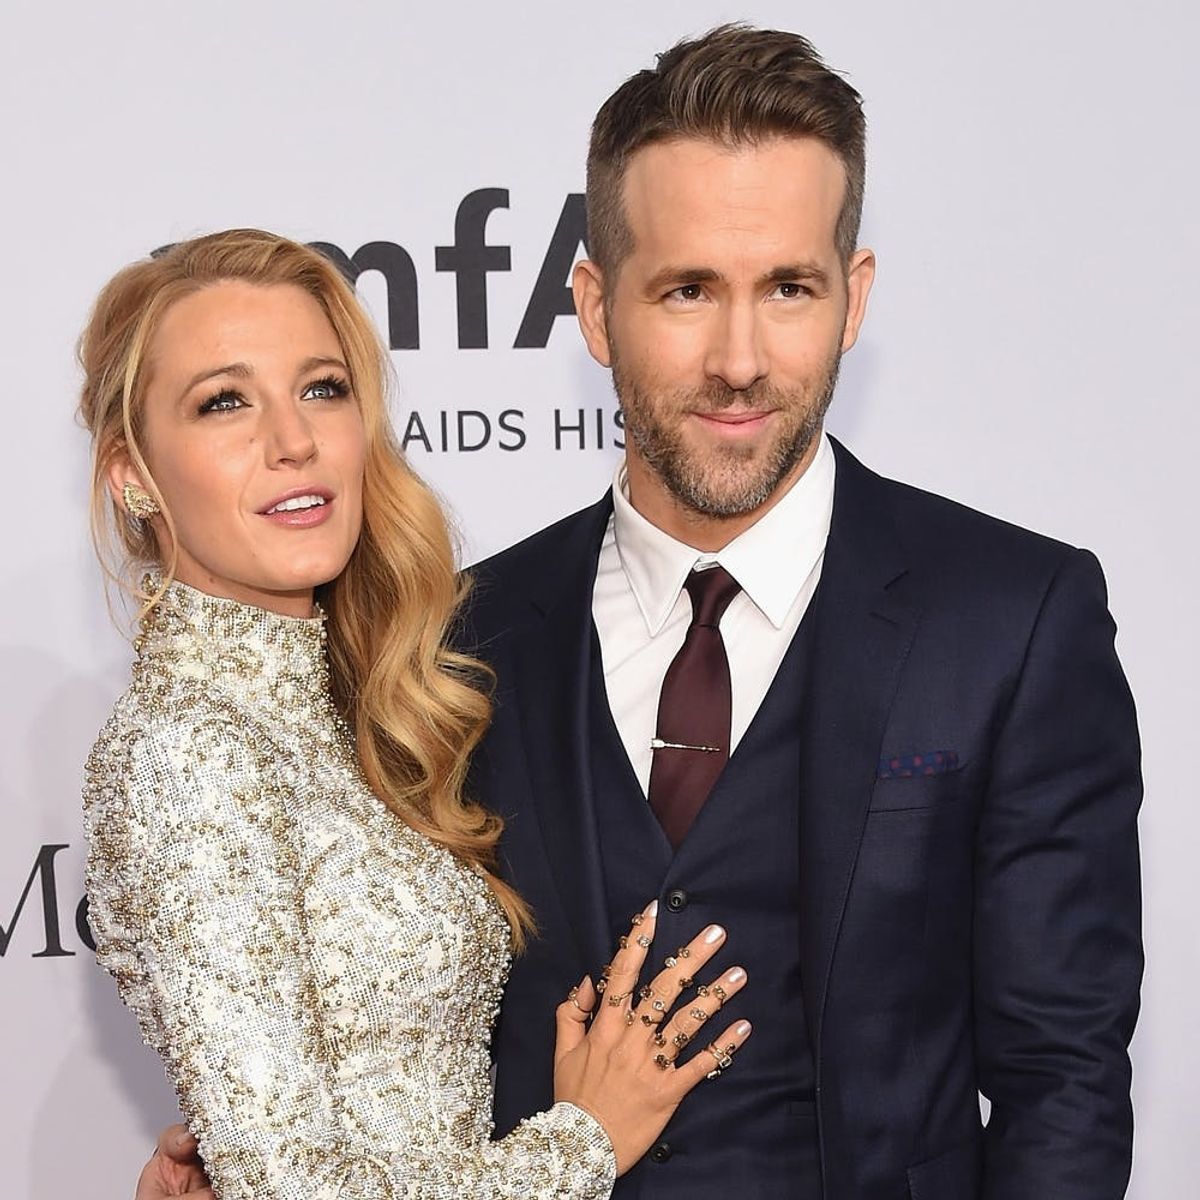 Guess Which Song Ryan Reynolds Played When Blake Lively Was in Labor